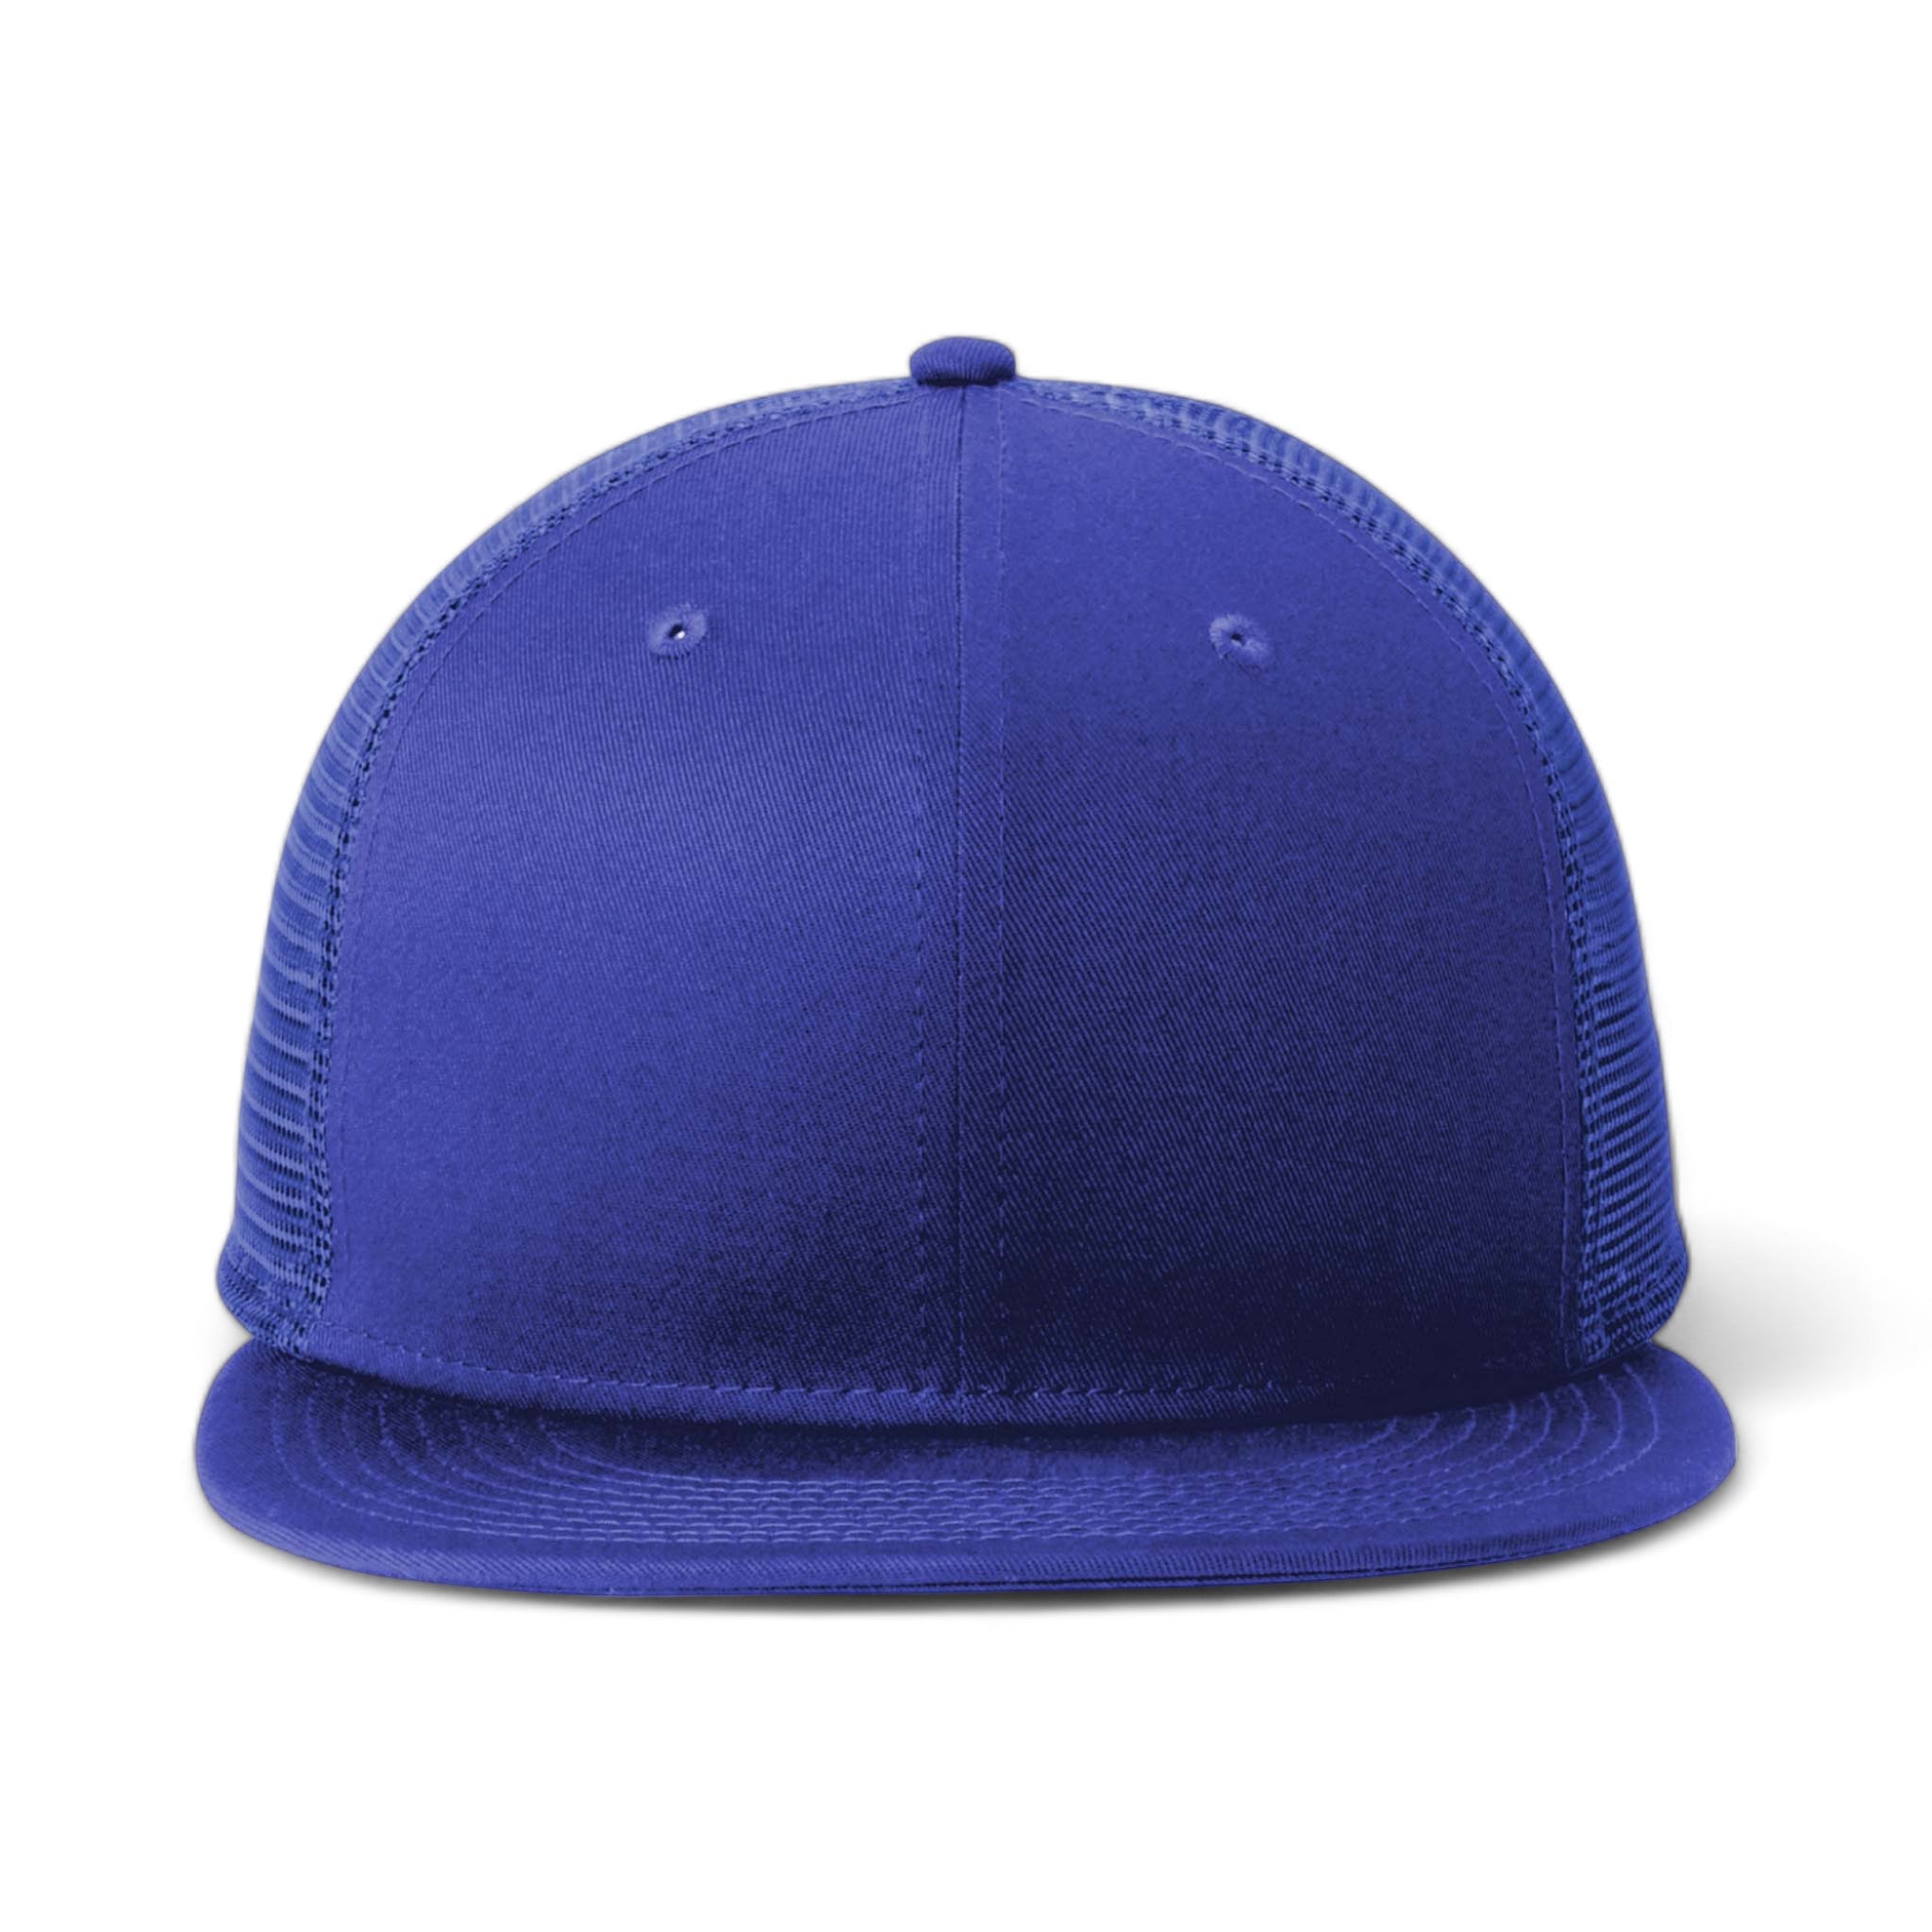 Front view of New Era NE4030 custom hat in royal and royal